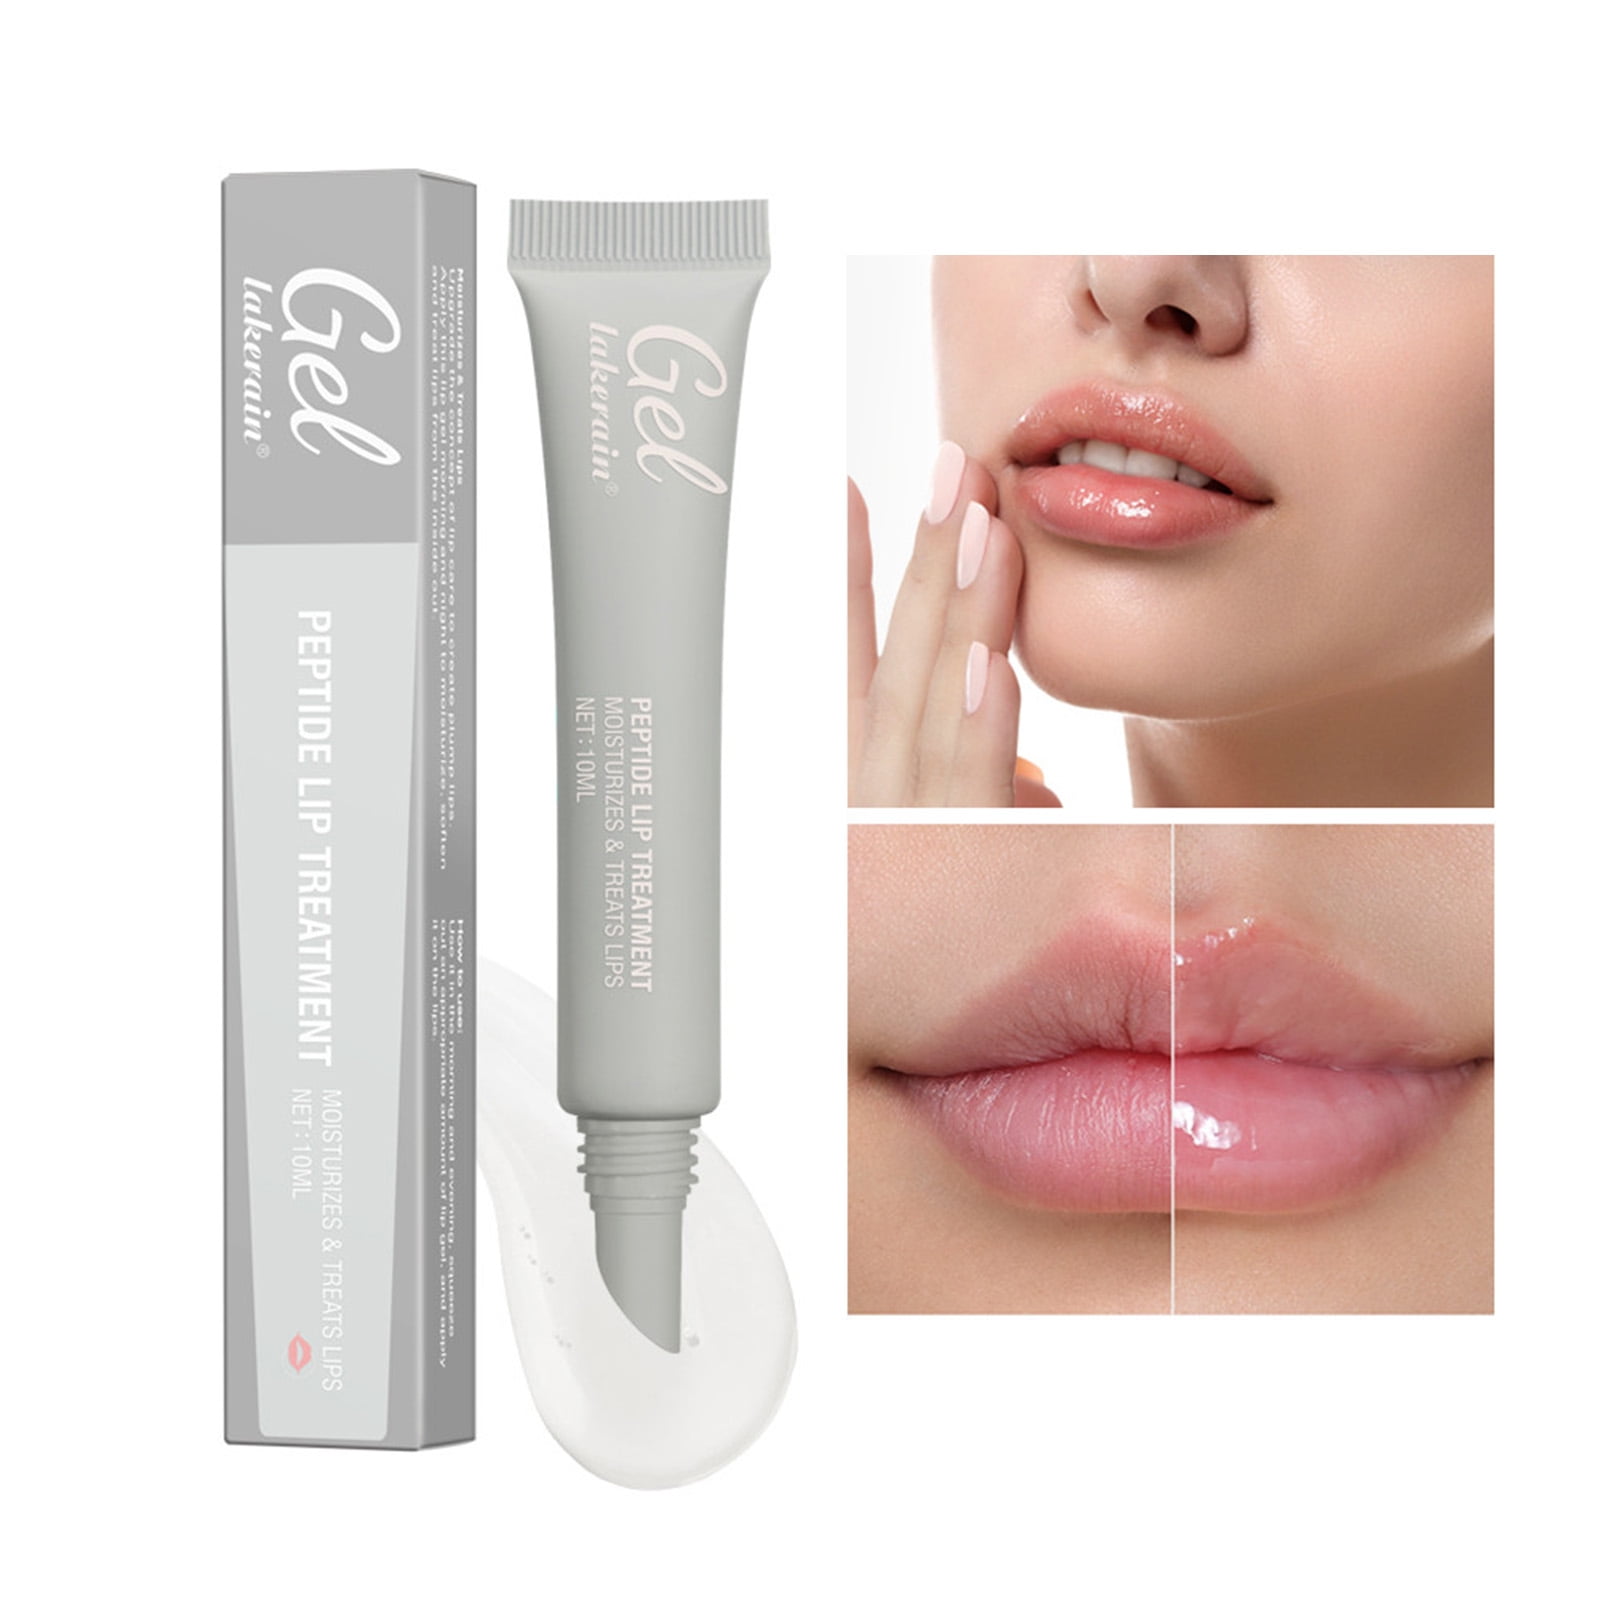 Rhode Peptide Lip Treatment, Balm, and Tint - Nourish and Enhance Your  Natural Beauty, Revitalize Your Lips